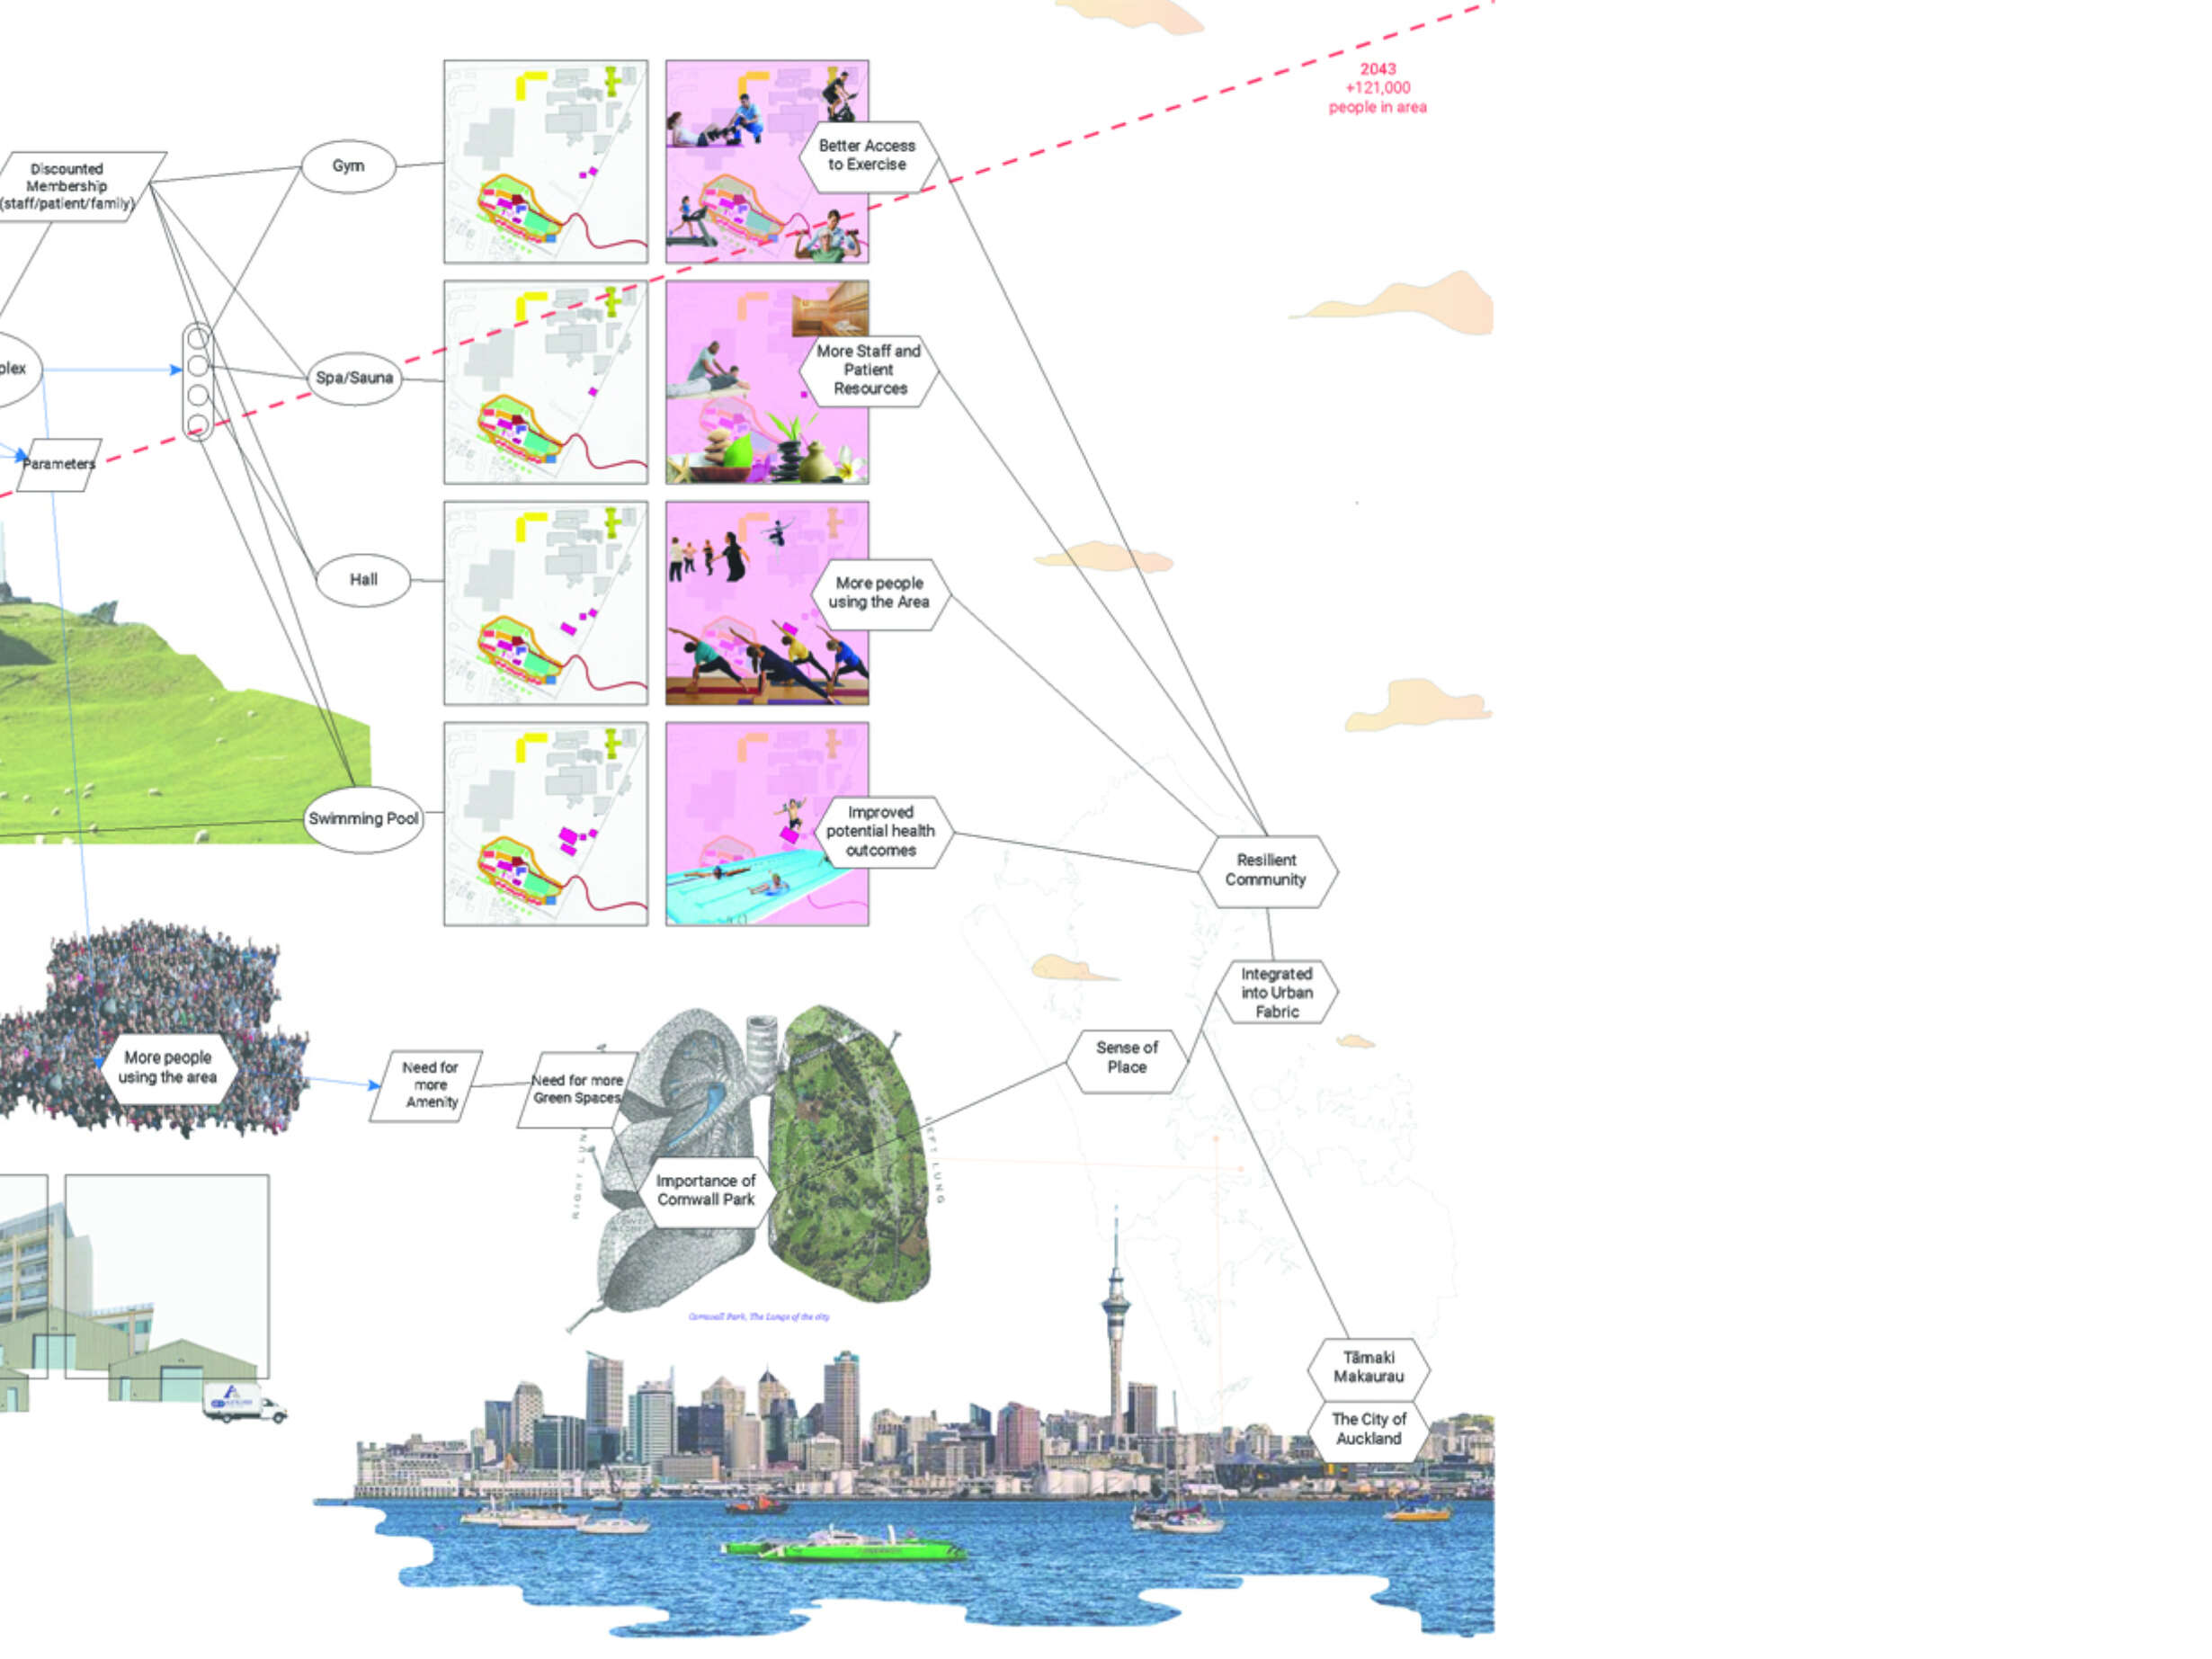 The ecology mapping and diagrams to visualize the complexity of the site, its interdependence with the city and the hidden potential of these connections.